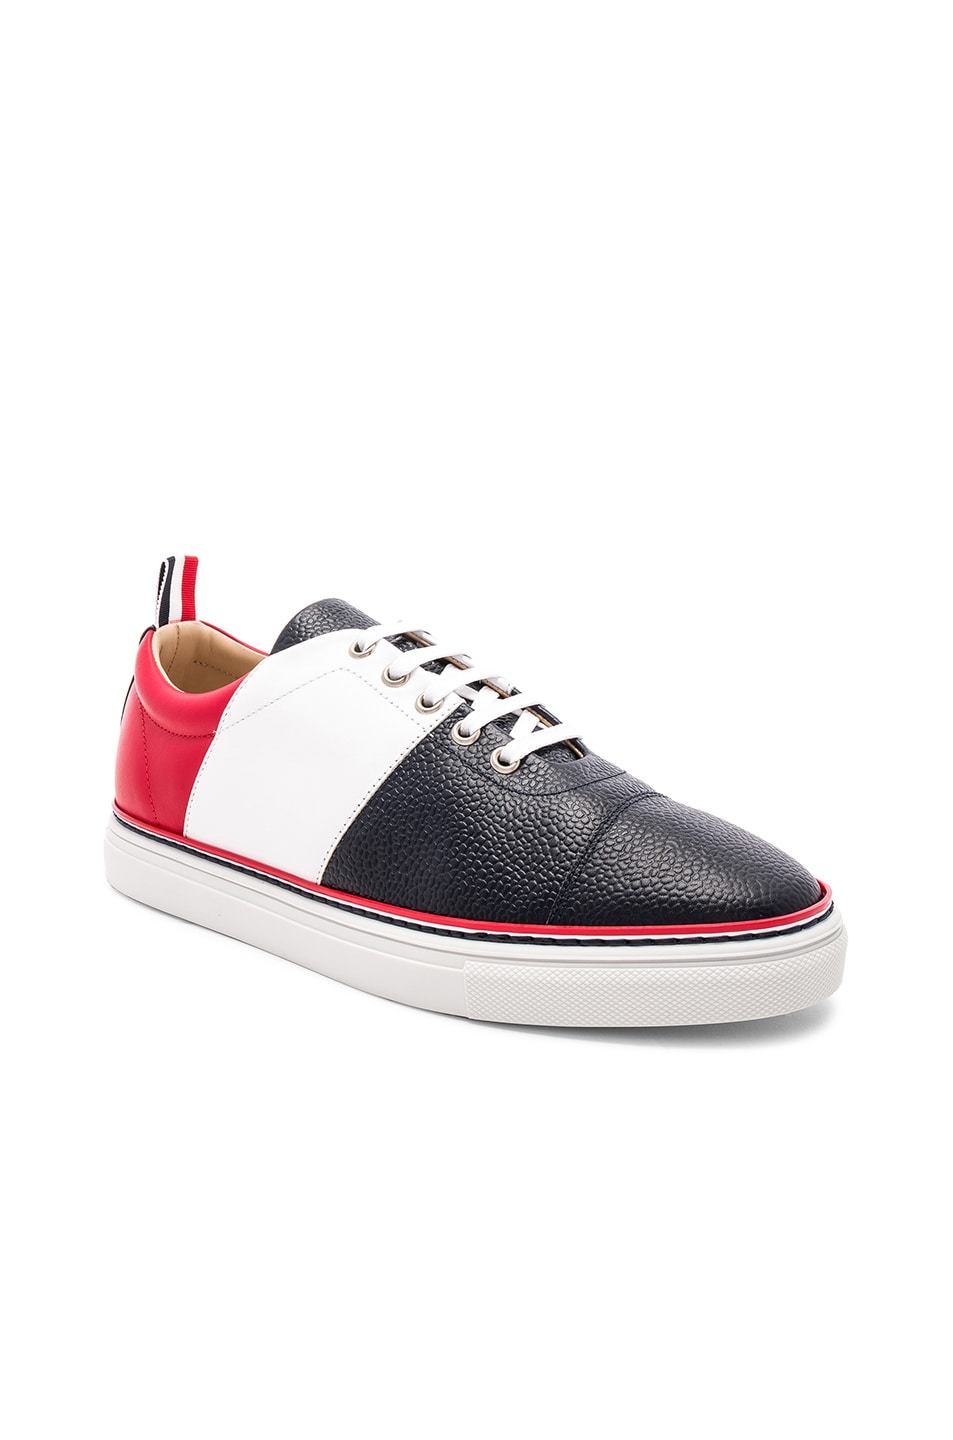 Image 1 of Thom Browne Pebble Grain Color Blocked Trainers in Red & White & Blue